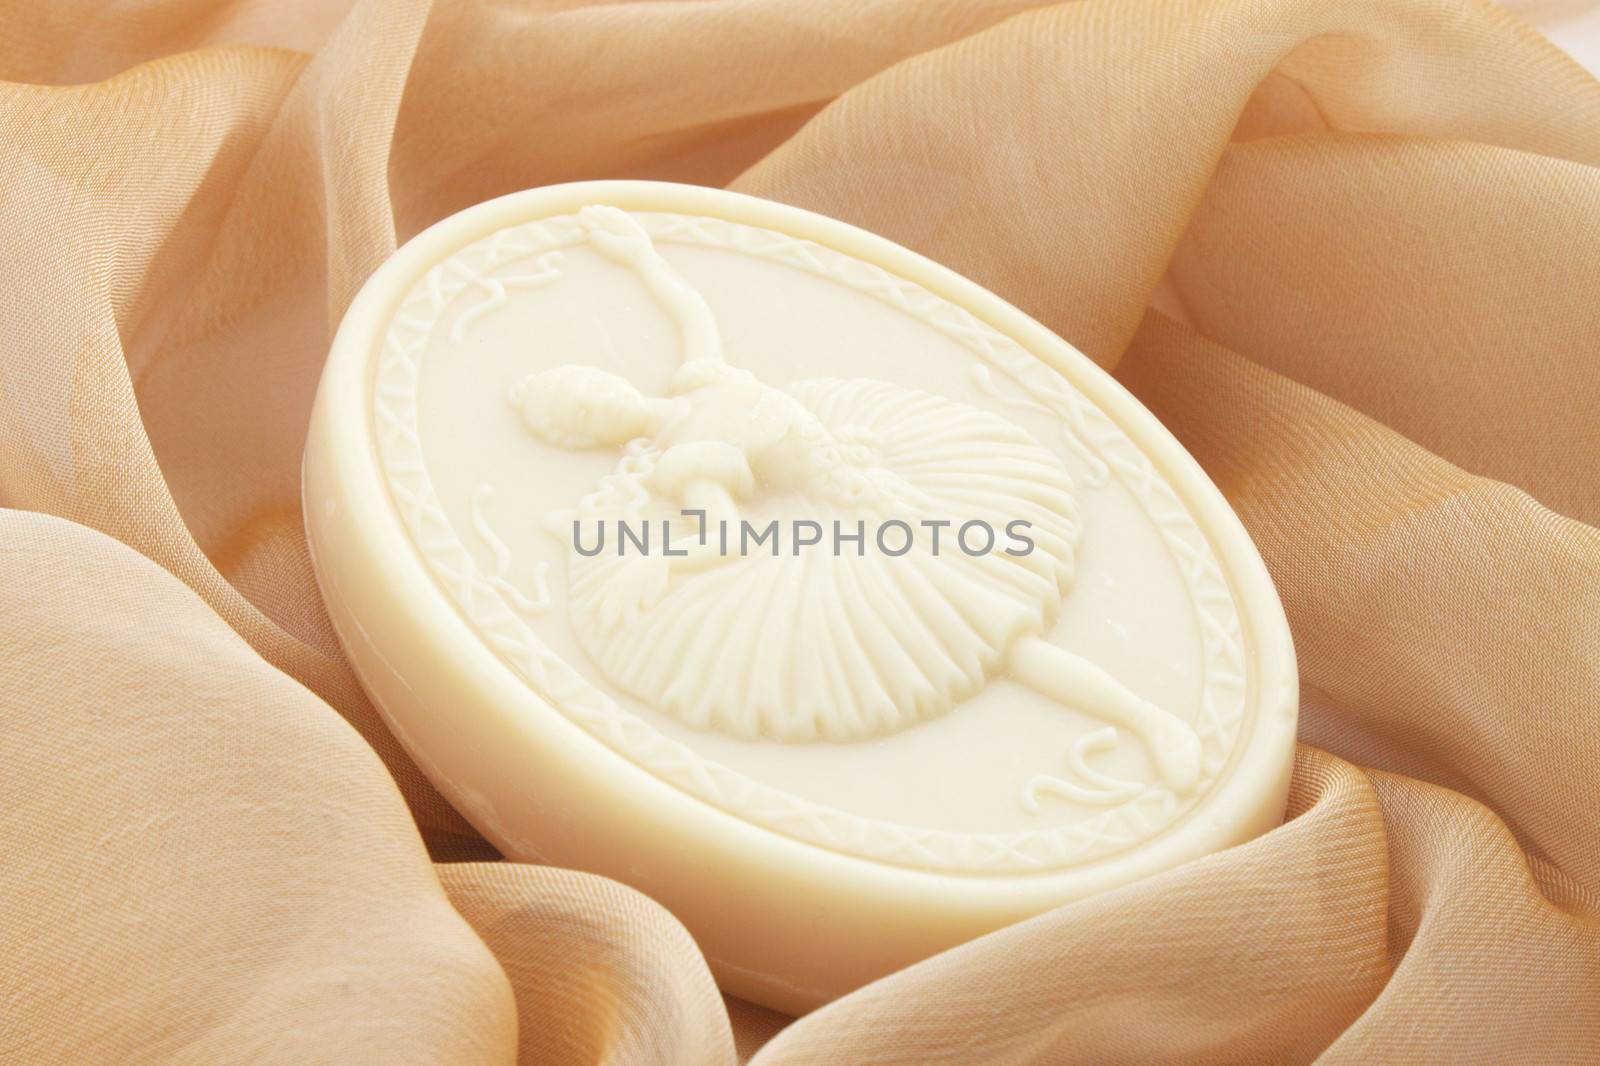 Soap with the image of the dancing ballerina